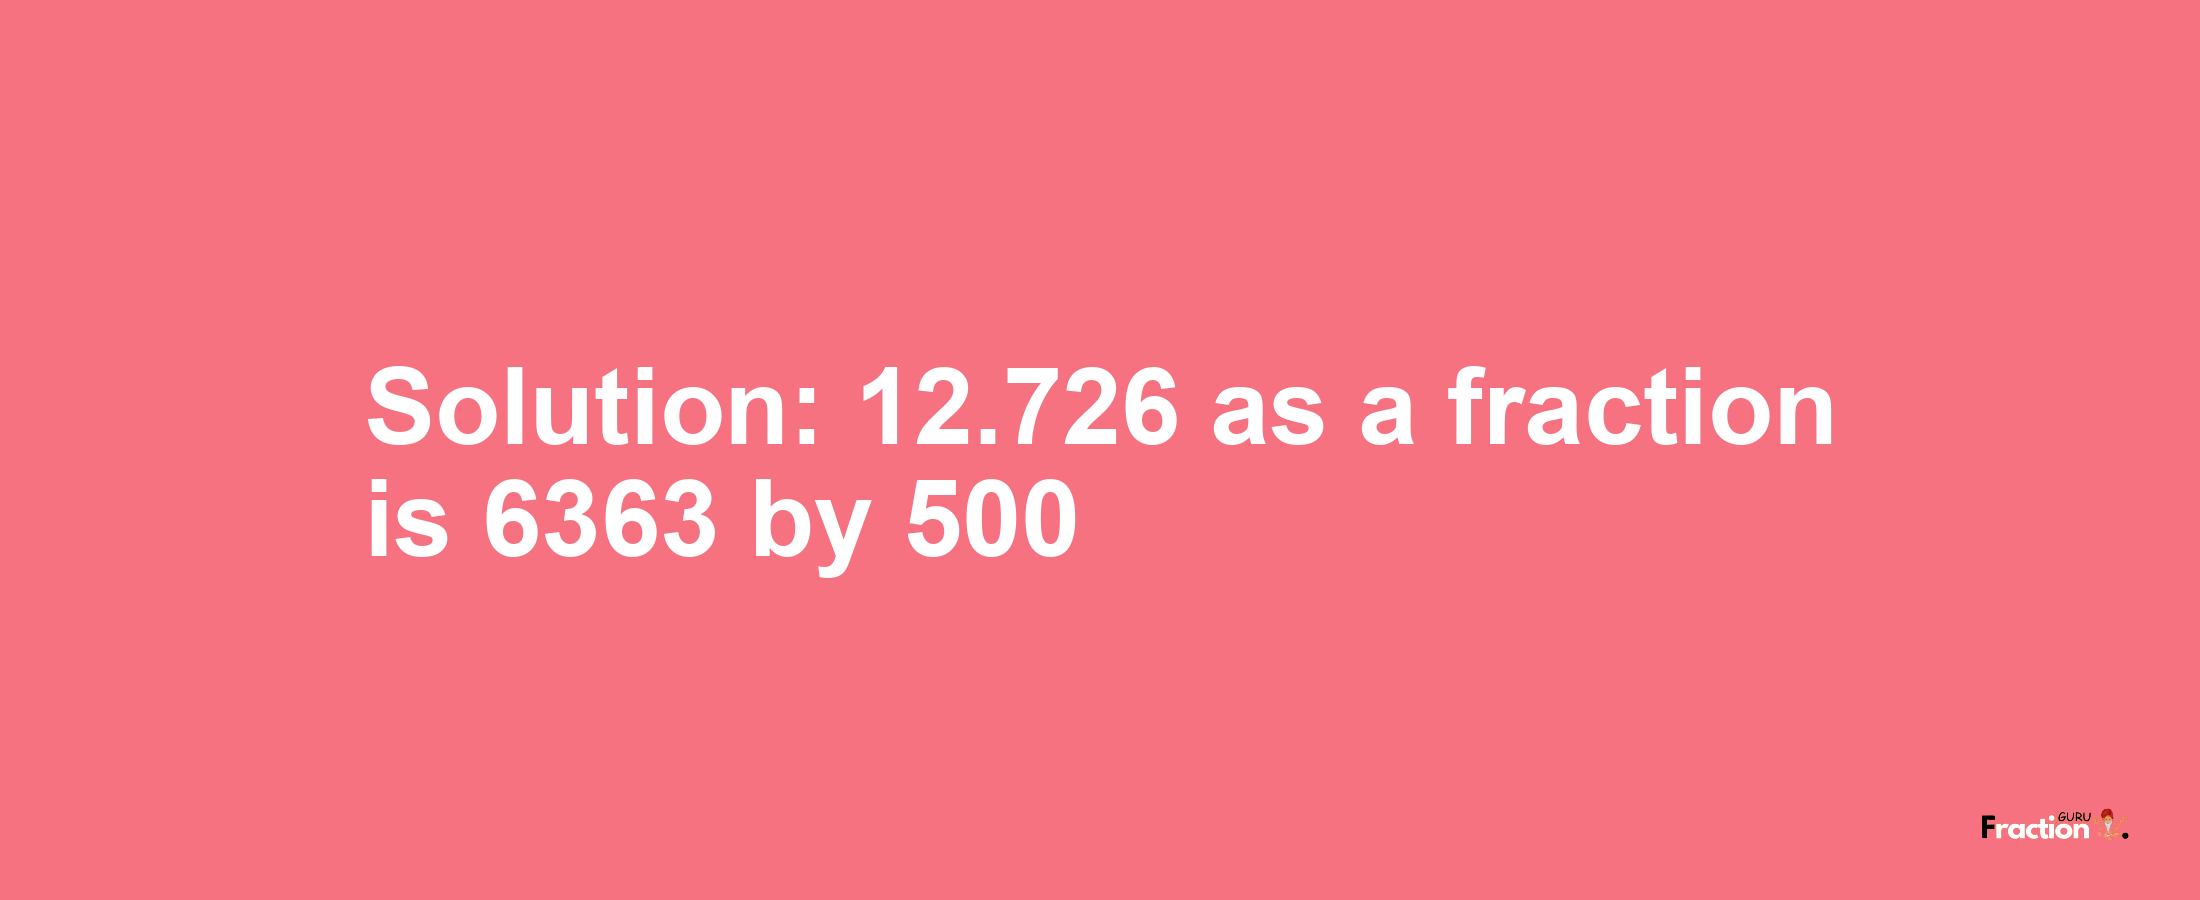 Solution:12.726 as a fraction is 6363/500